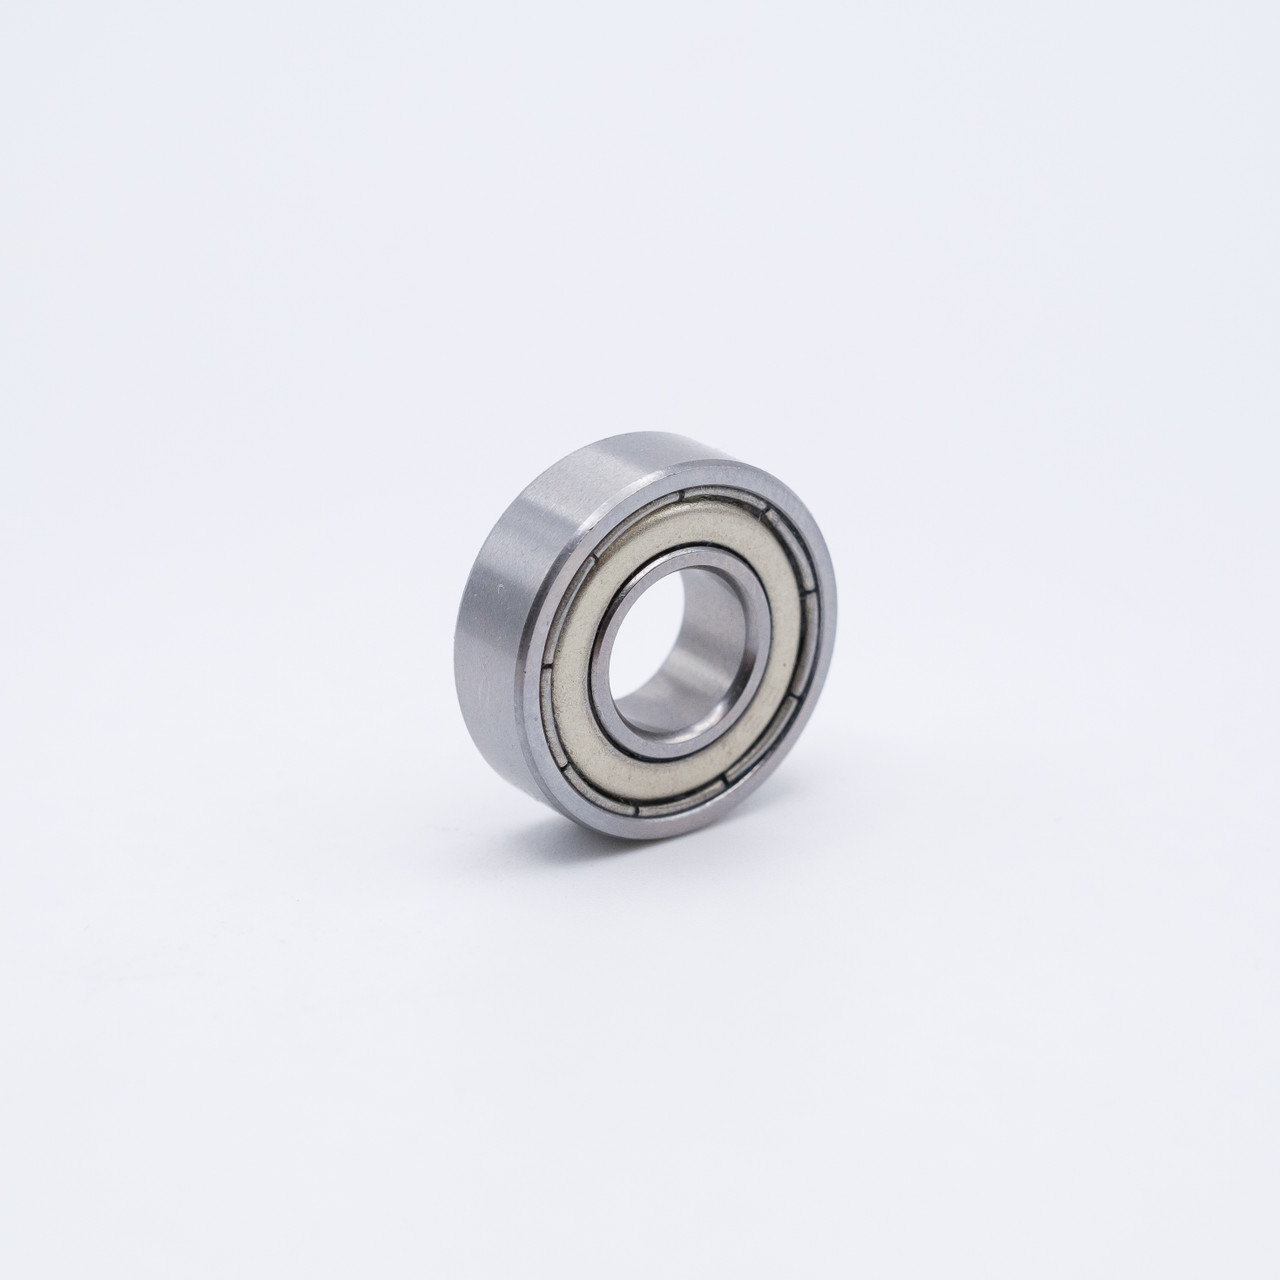 SR168-ZZ Stainless Steel Miniature Ball Bearing 1/4x3/8x1/8 Angled View